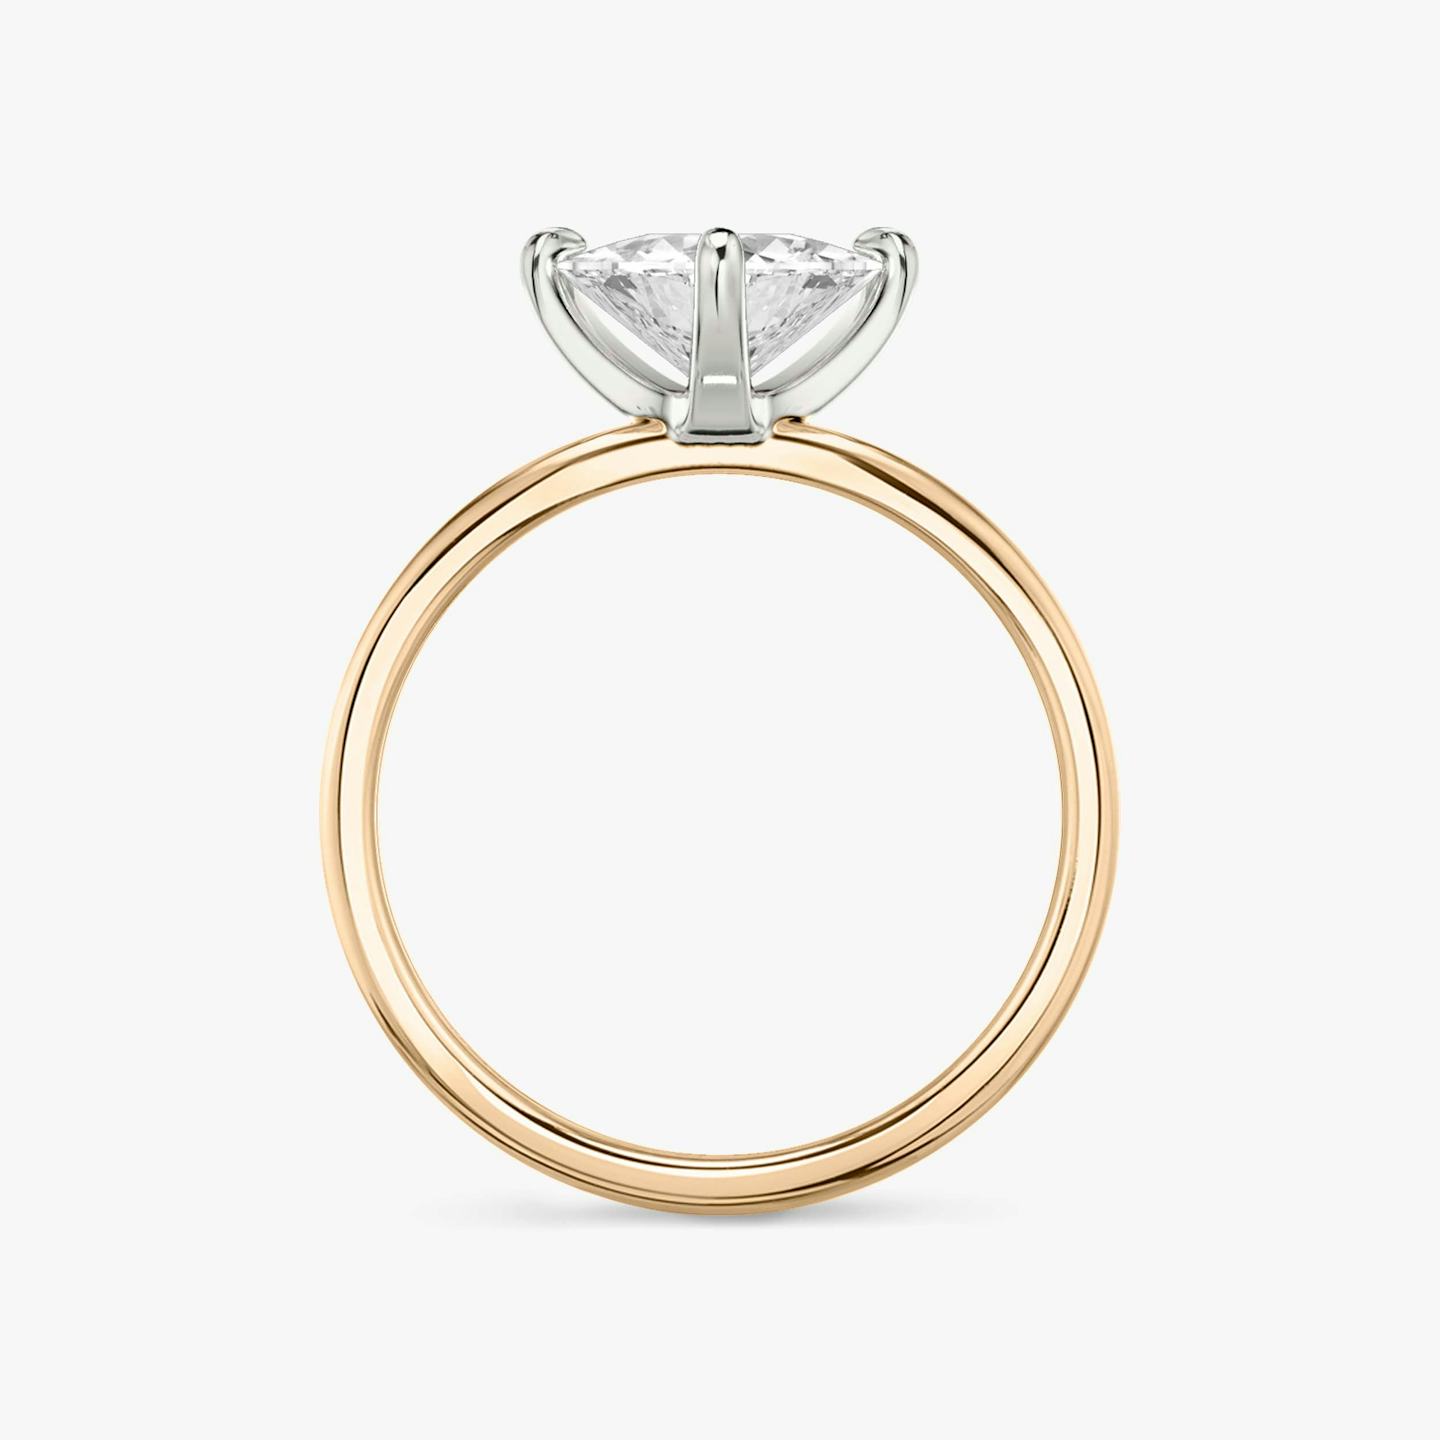 The Classic Two Tone | Trillion | 14k | 14k Rose Gold and Platinum | Band: Plain | Diamond orientation: vertical | Carat weight: See full inventory